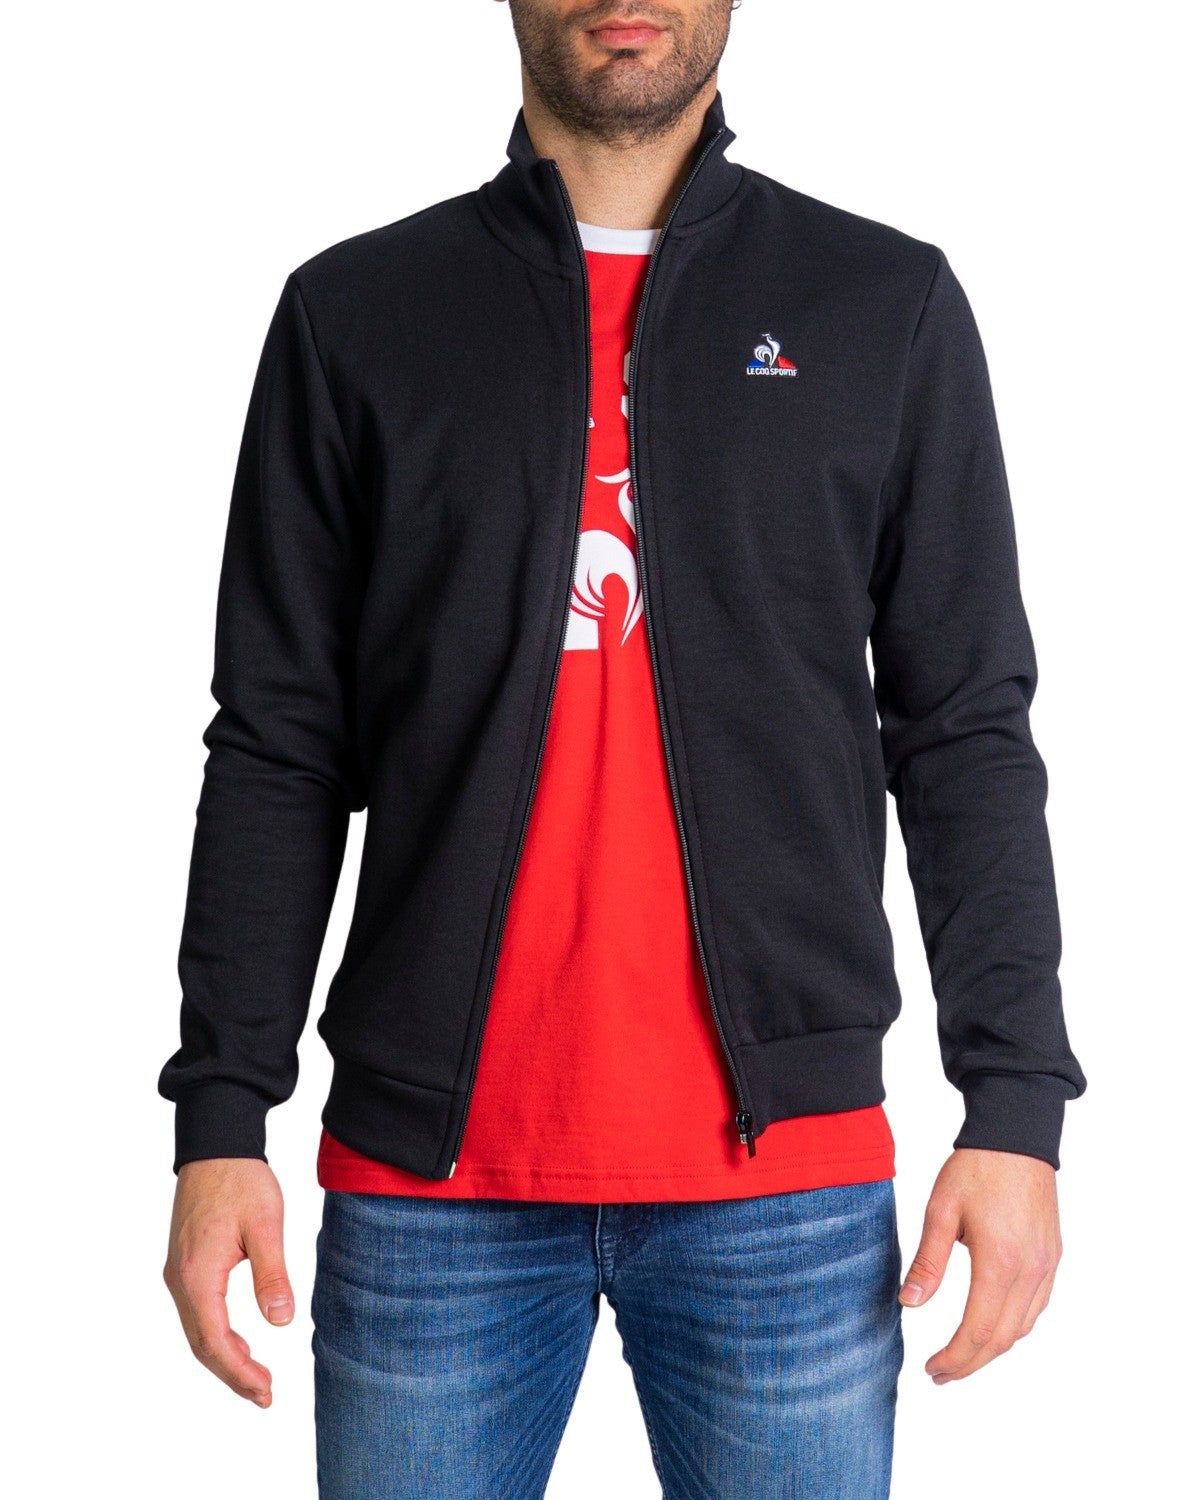 Brand: Le Coq Sportif
Gender: Men
Type: Sweatshirts
Season: Spring/Summer

PRODUCT DETAIL
• Color: black
• Fastening: with zip
• Sleeves: long
• Pockets: front pockets

COMPOSITION AND MATERIAL
• Composition: -85% cotton -15% polyester 
•  Washing: machine wash at 30°